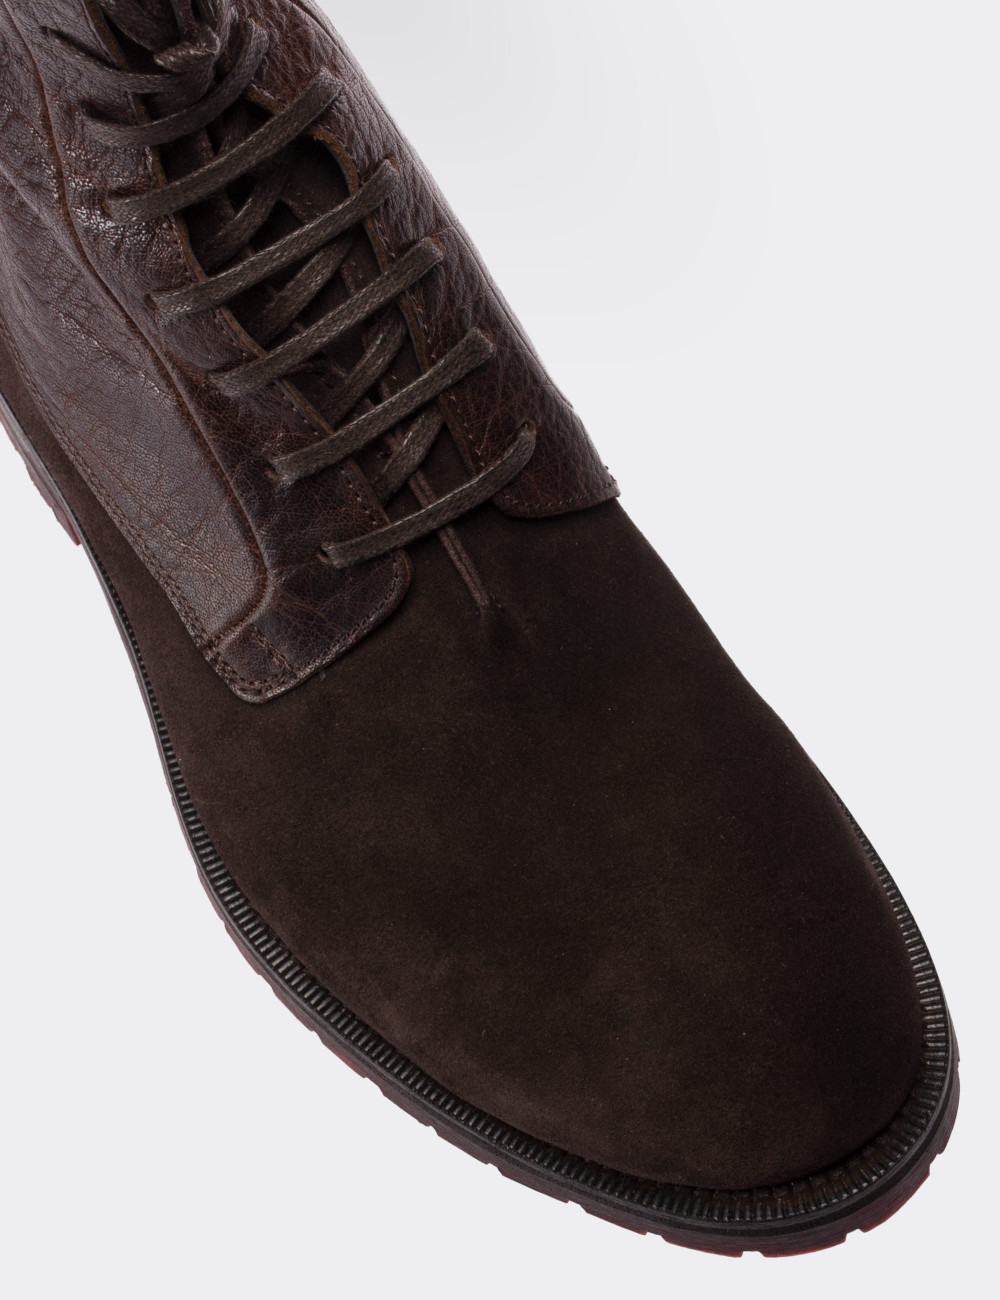 Brown Suede Leather Boots - 01324MKHVC03